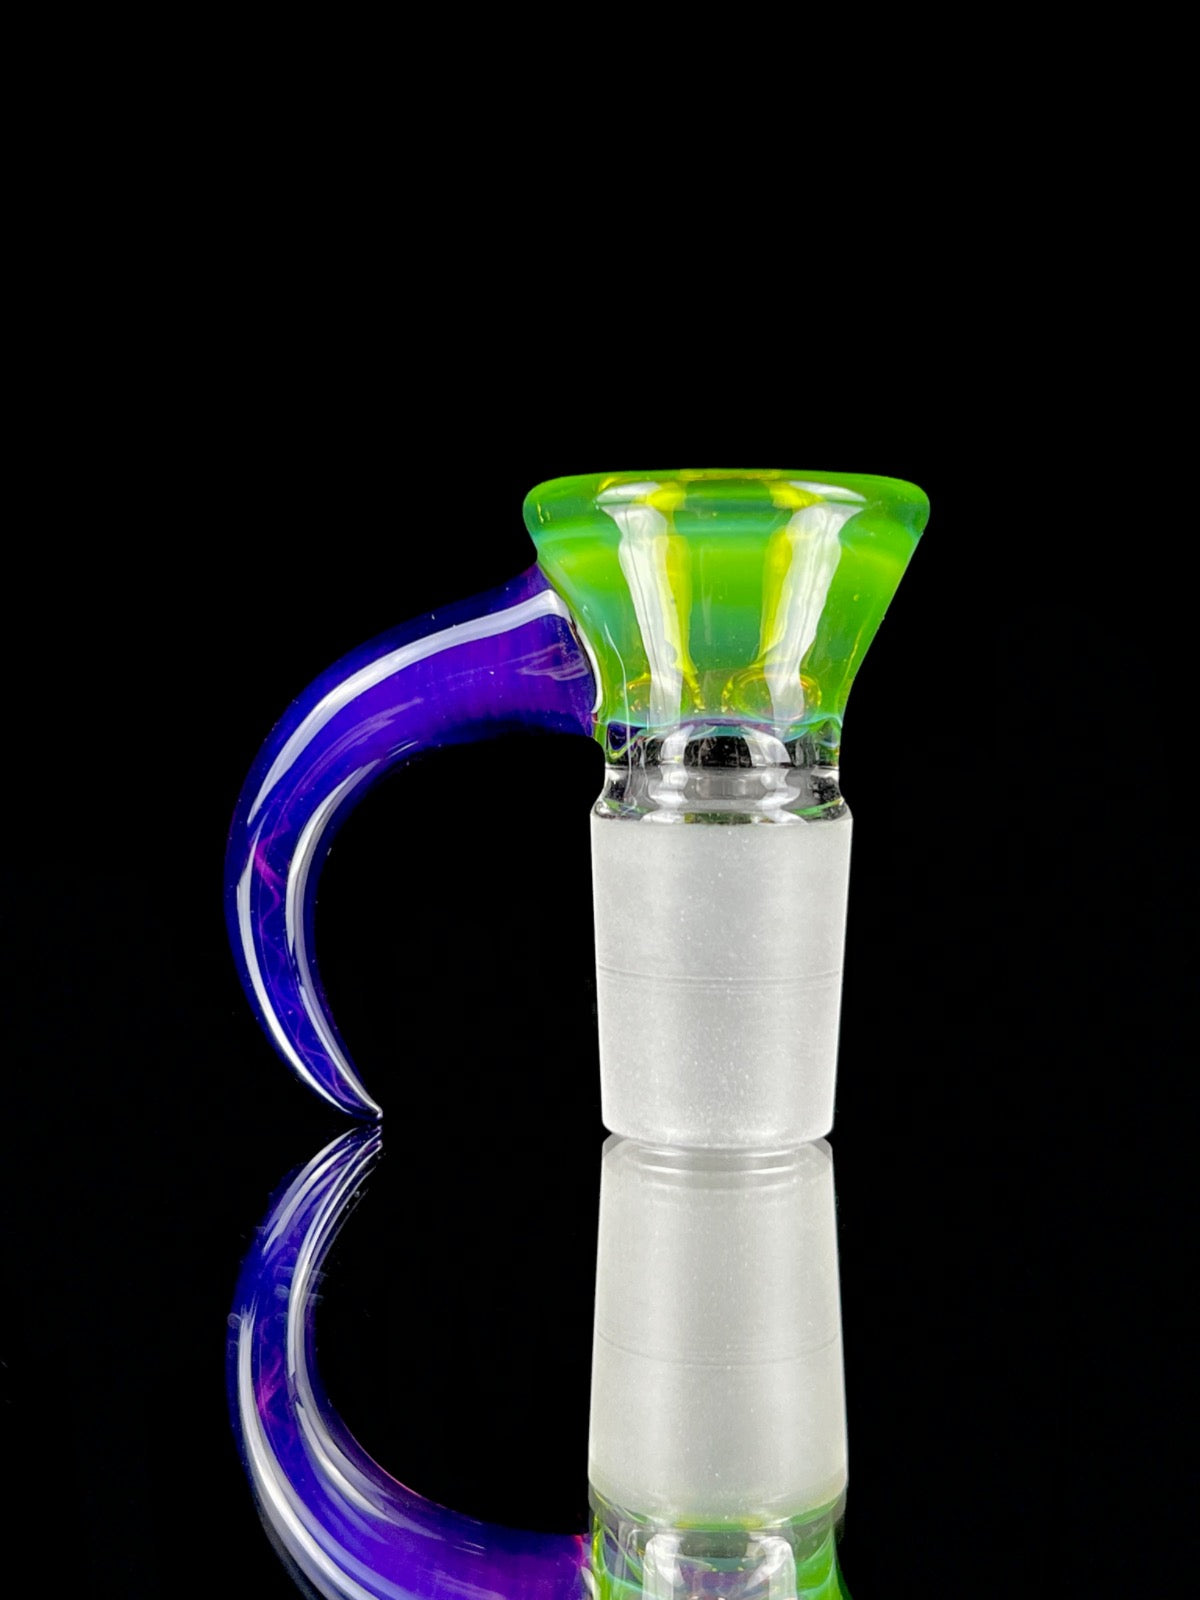 18mm full-accent Green Opal slide with Royal Jelly accents by Welch Glass